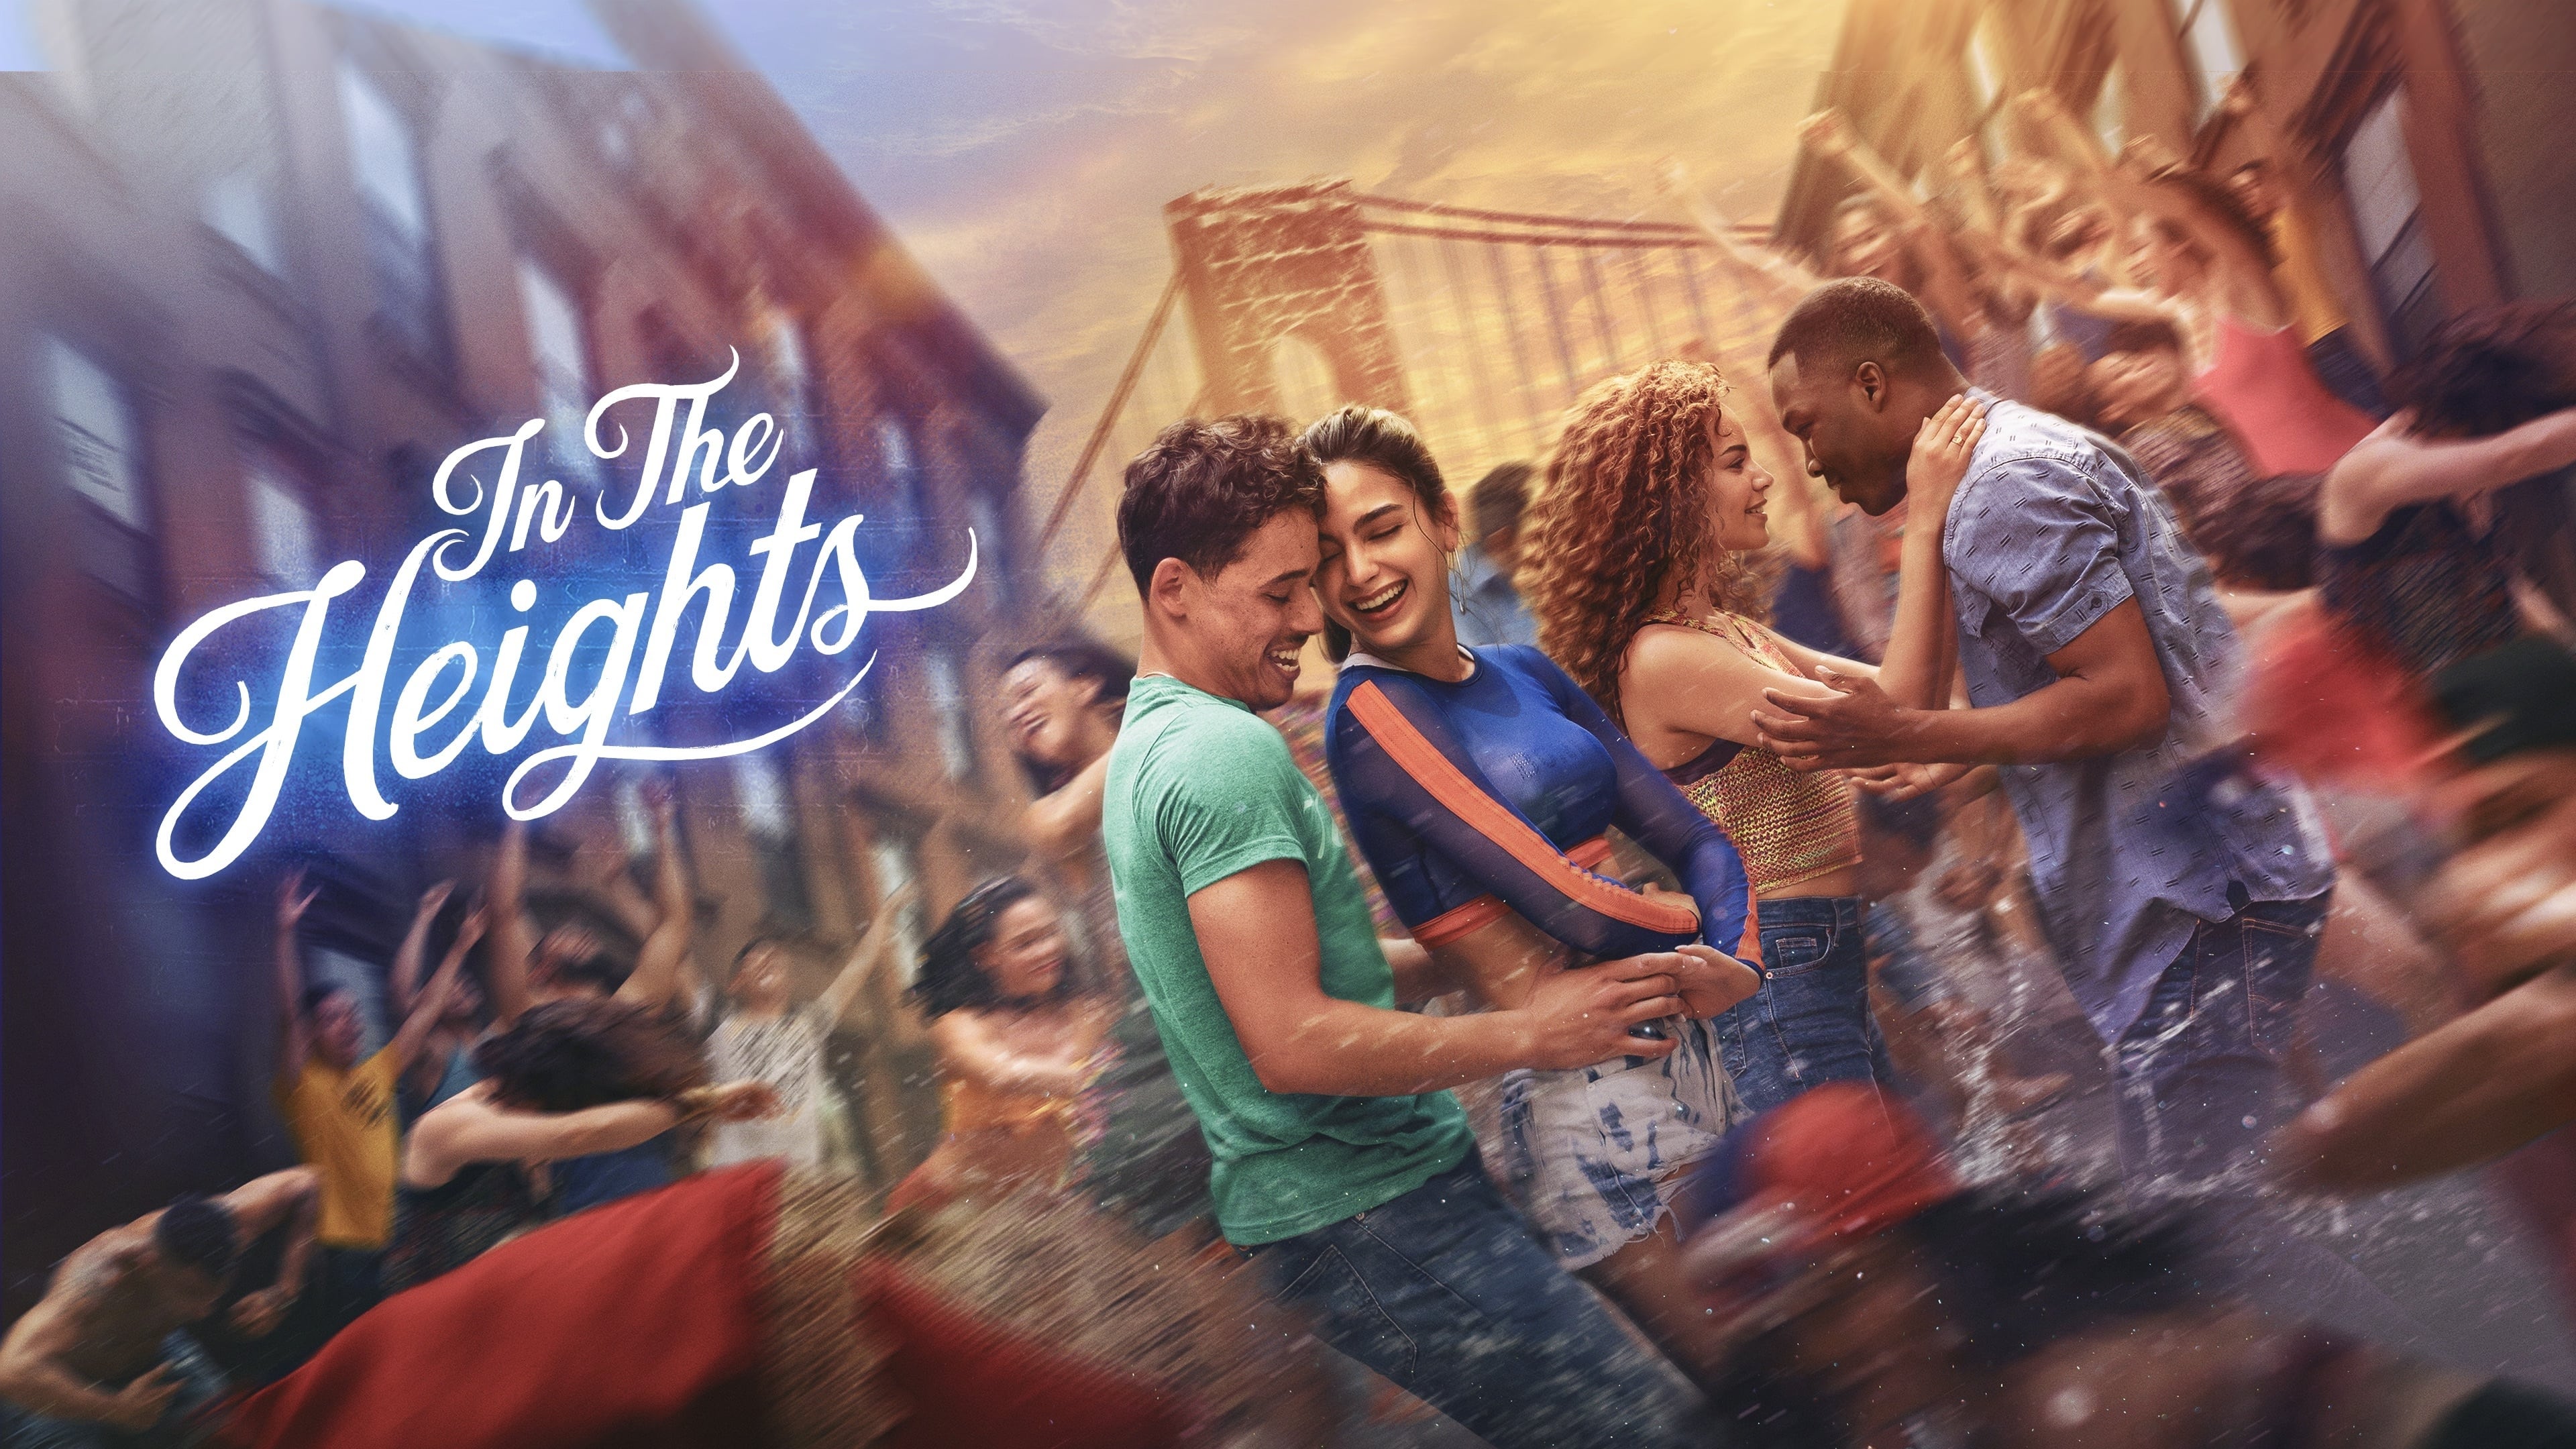 Watch In the Heights (2021) Full Movie Online in HD Quality | Finnleaks.